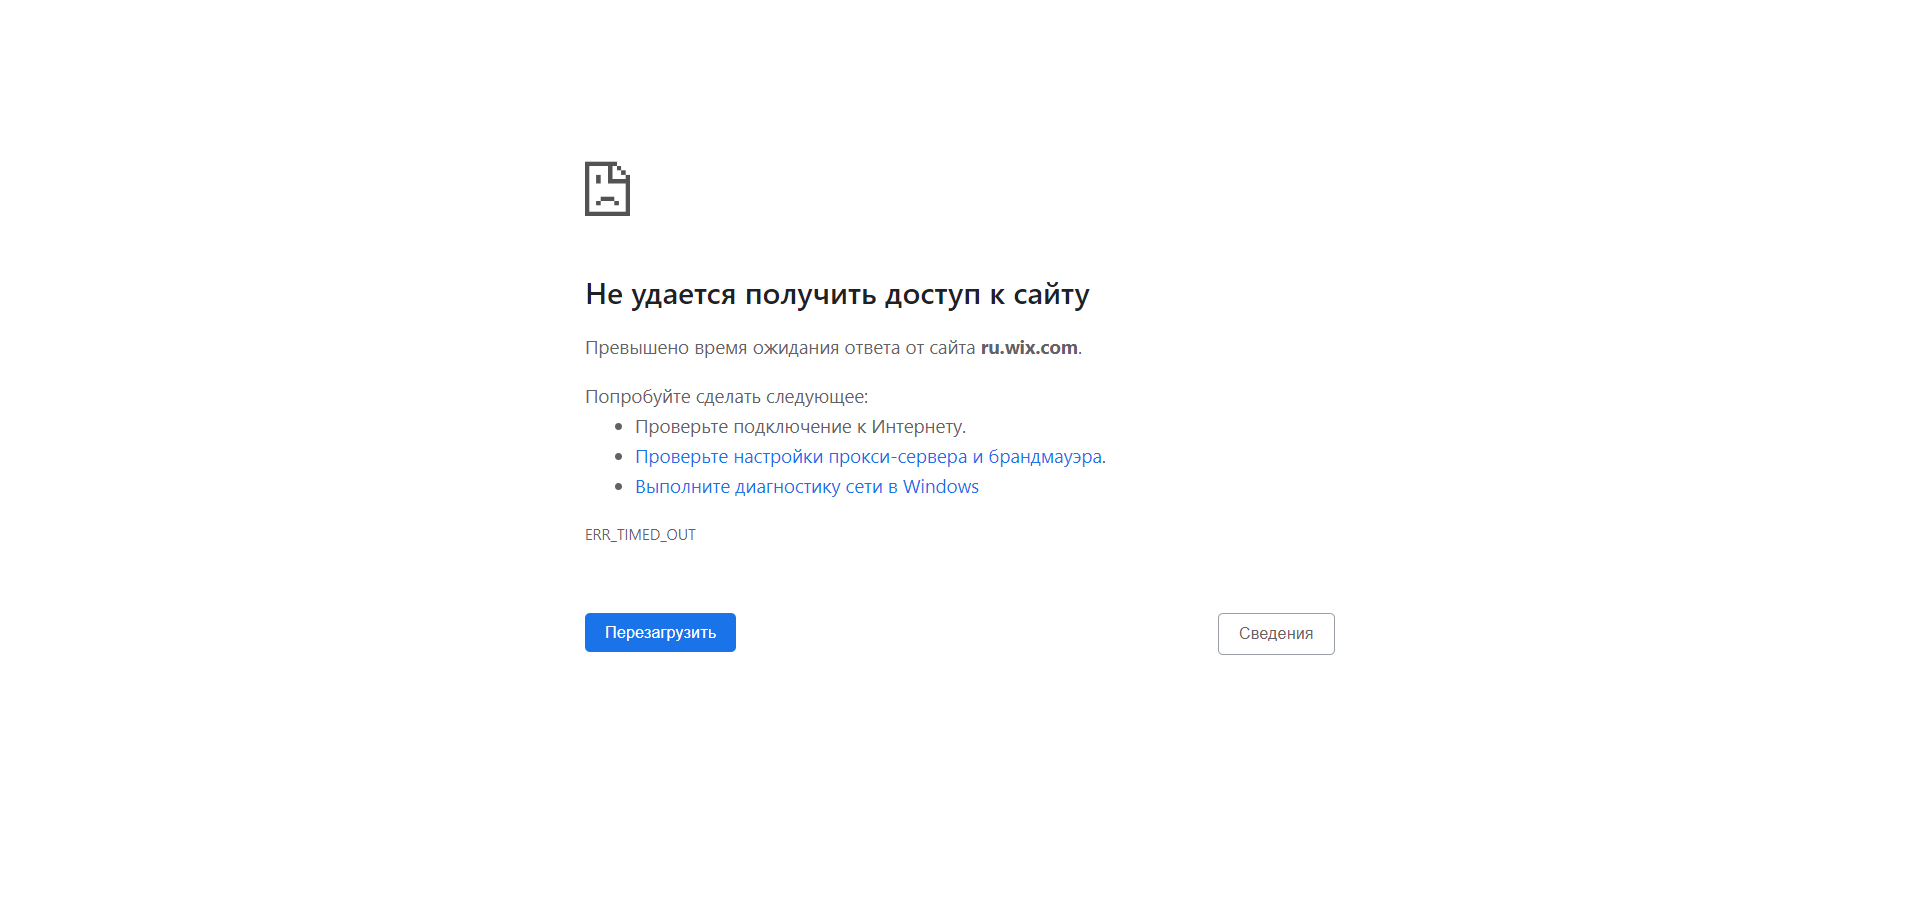 Wix stopped working in Russia